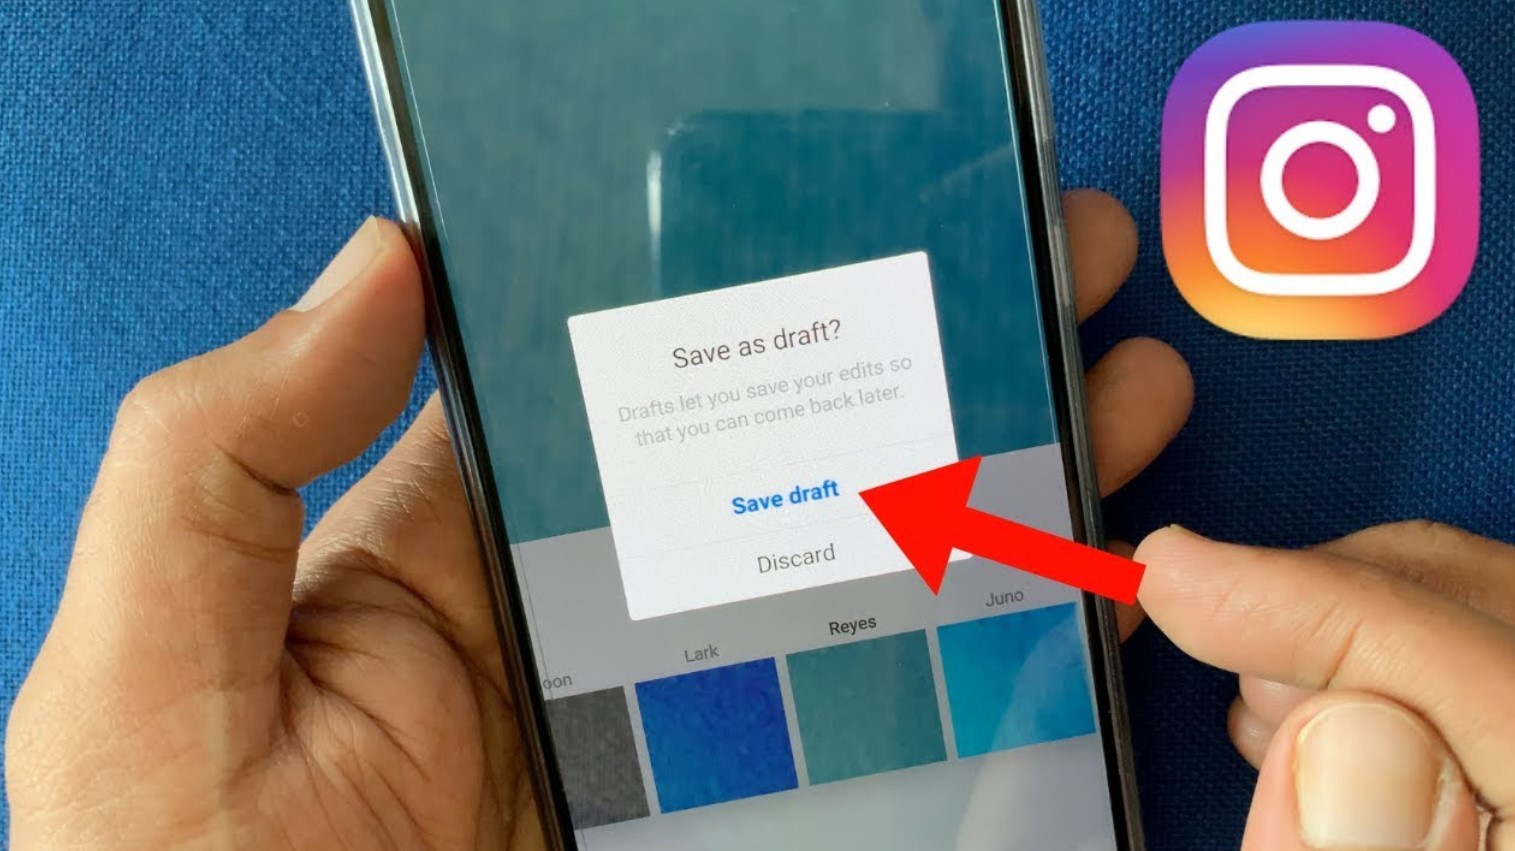  A hand holding a mobile phone with the Instagram app open and a pop-up window asking if the user wants to save a draft of their Instagram post.